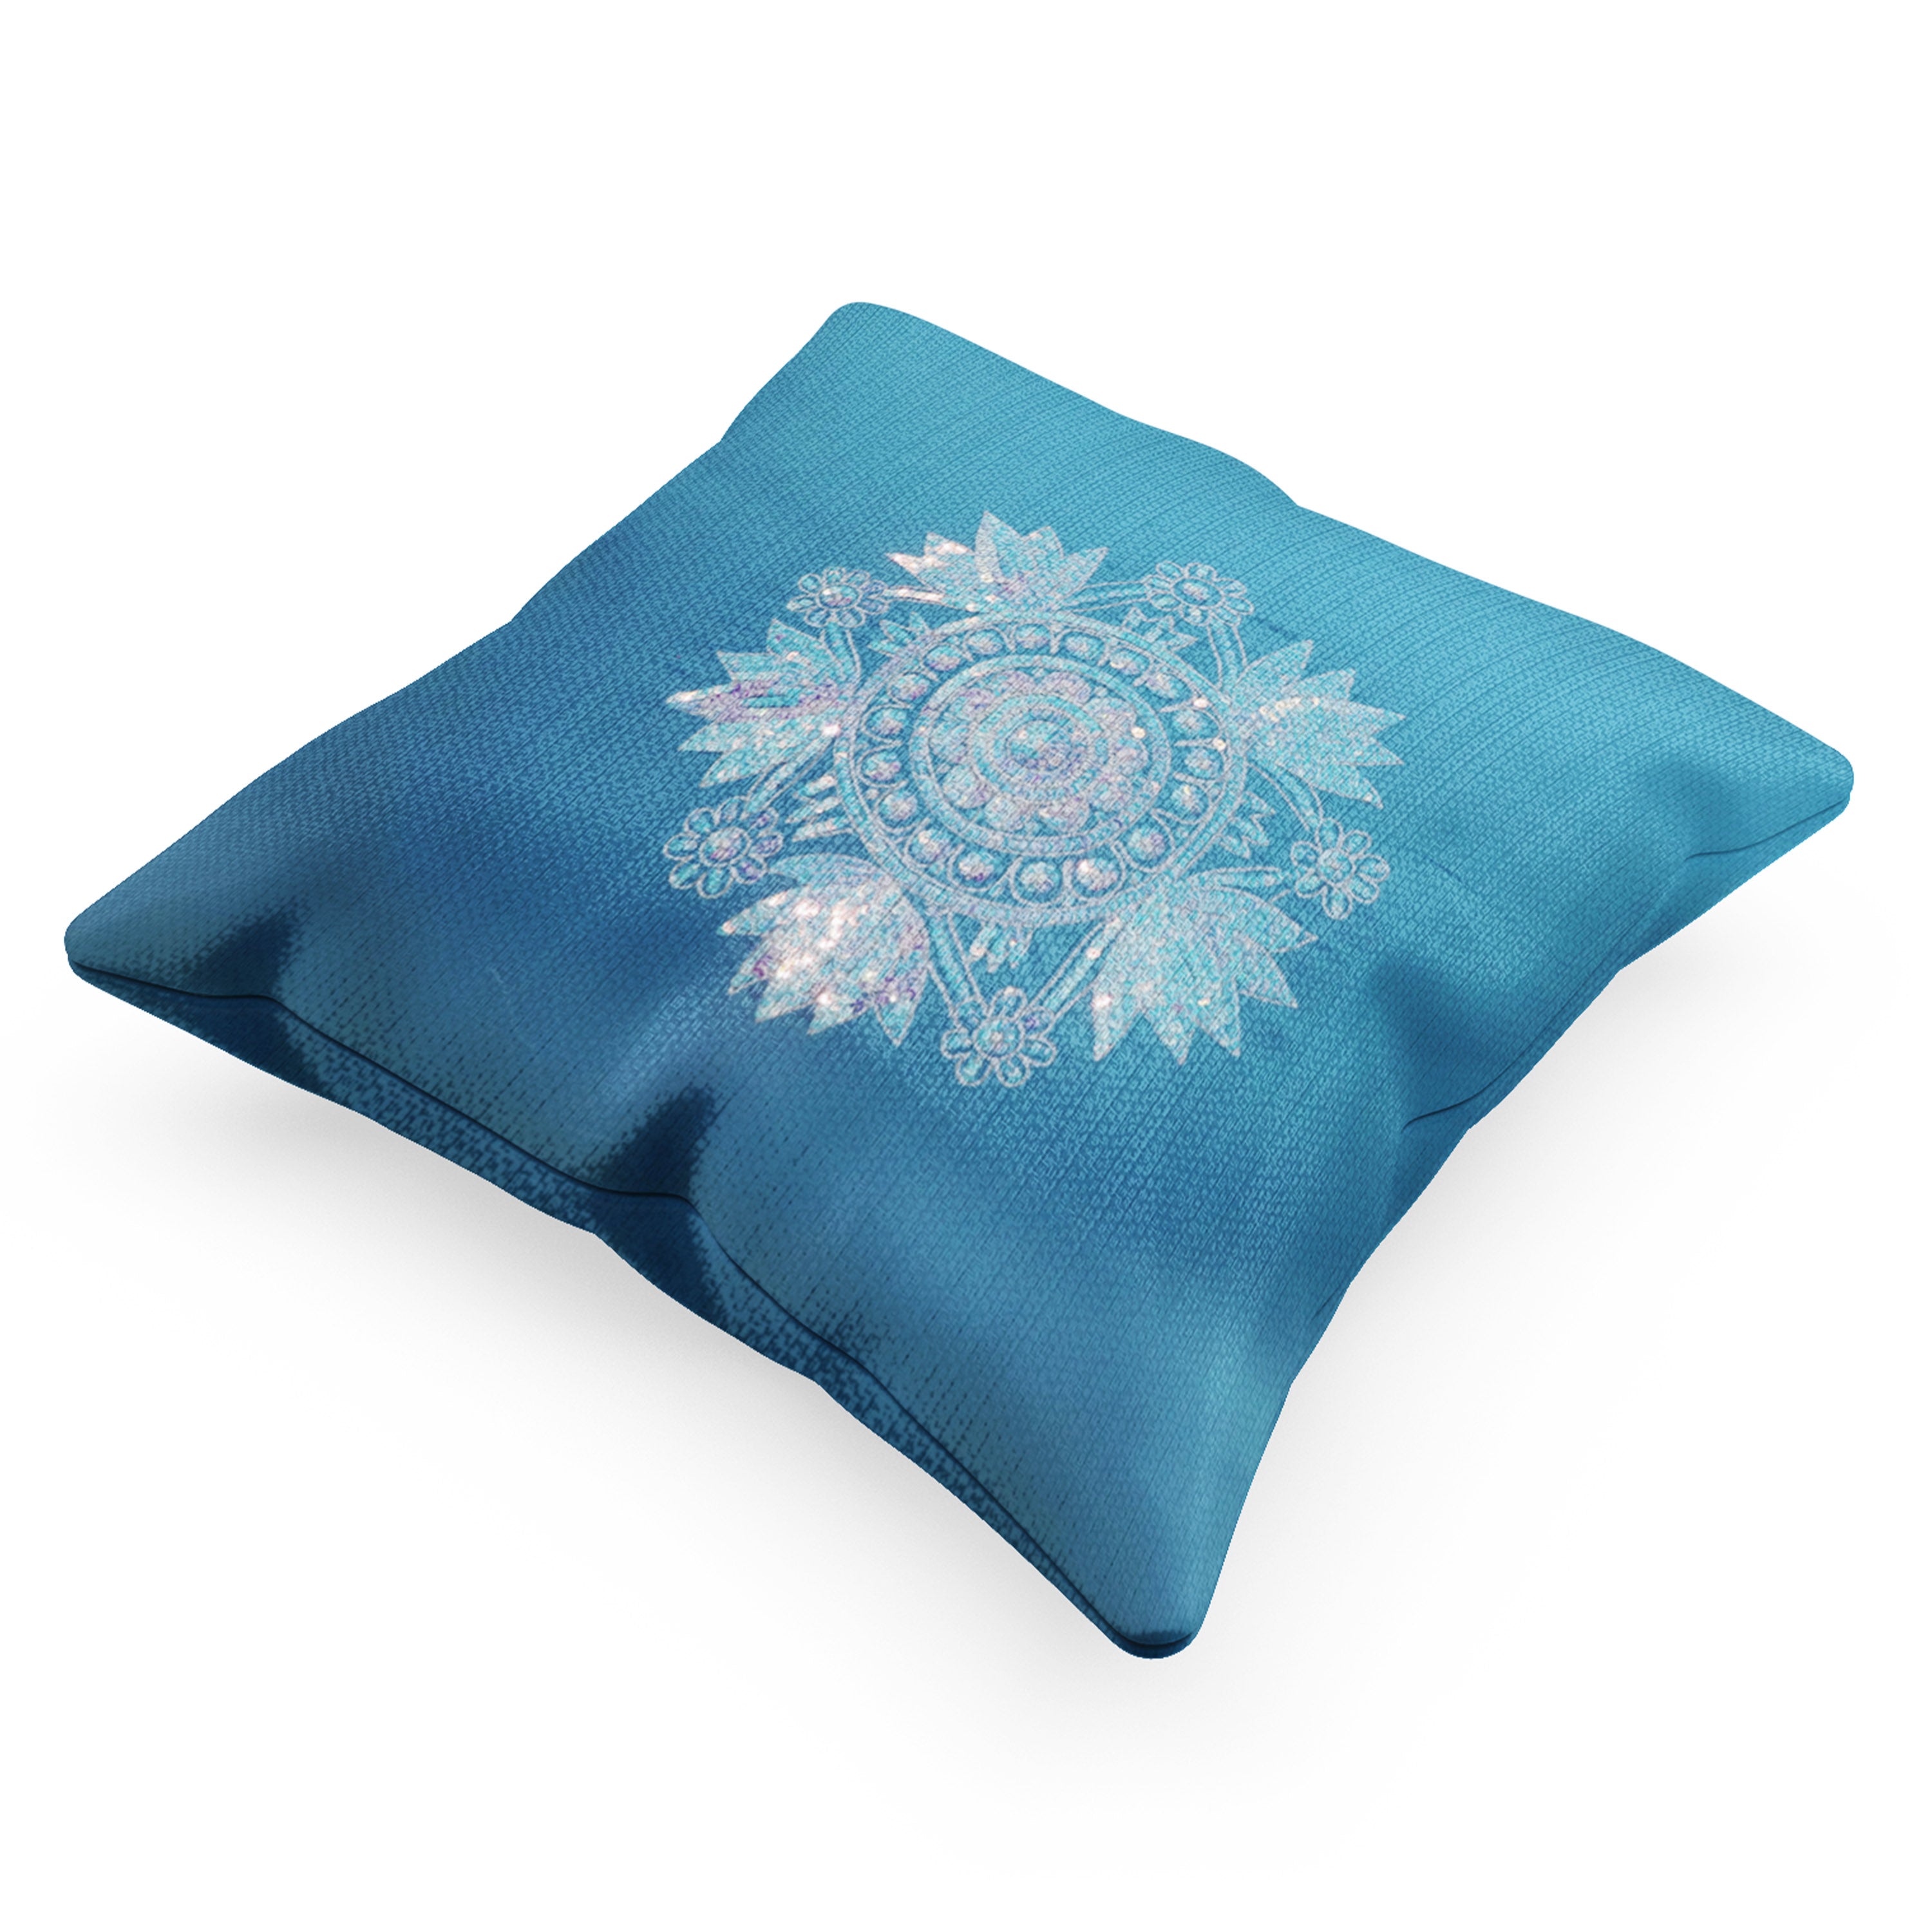 Cool Flora Hand Embroidered Cushion